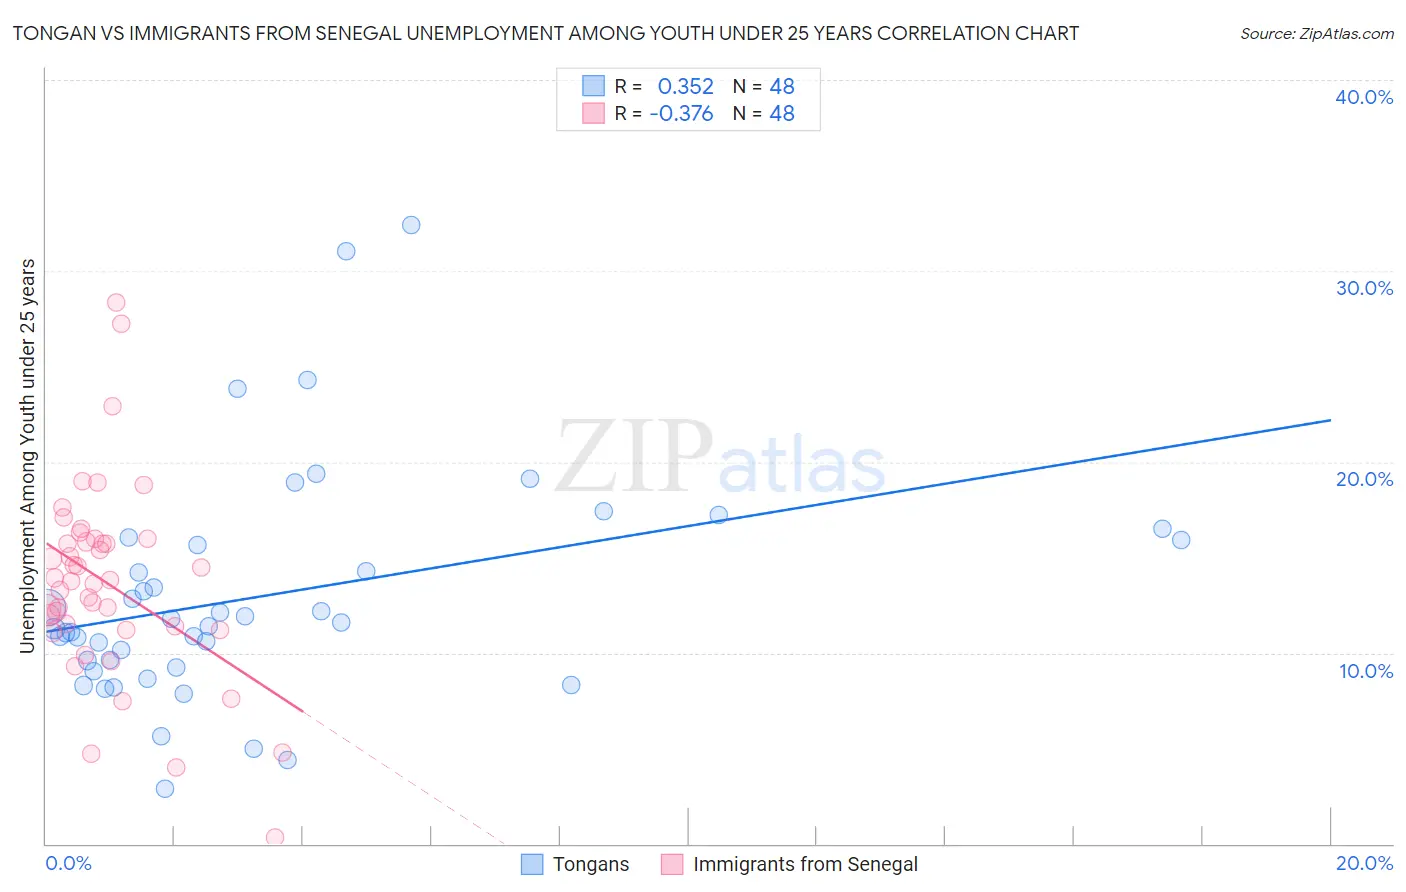 Tongan vs Immigrants from Senegal Unemployment Among Youth under 25 years